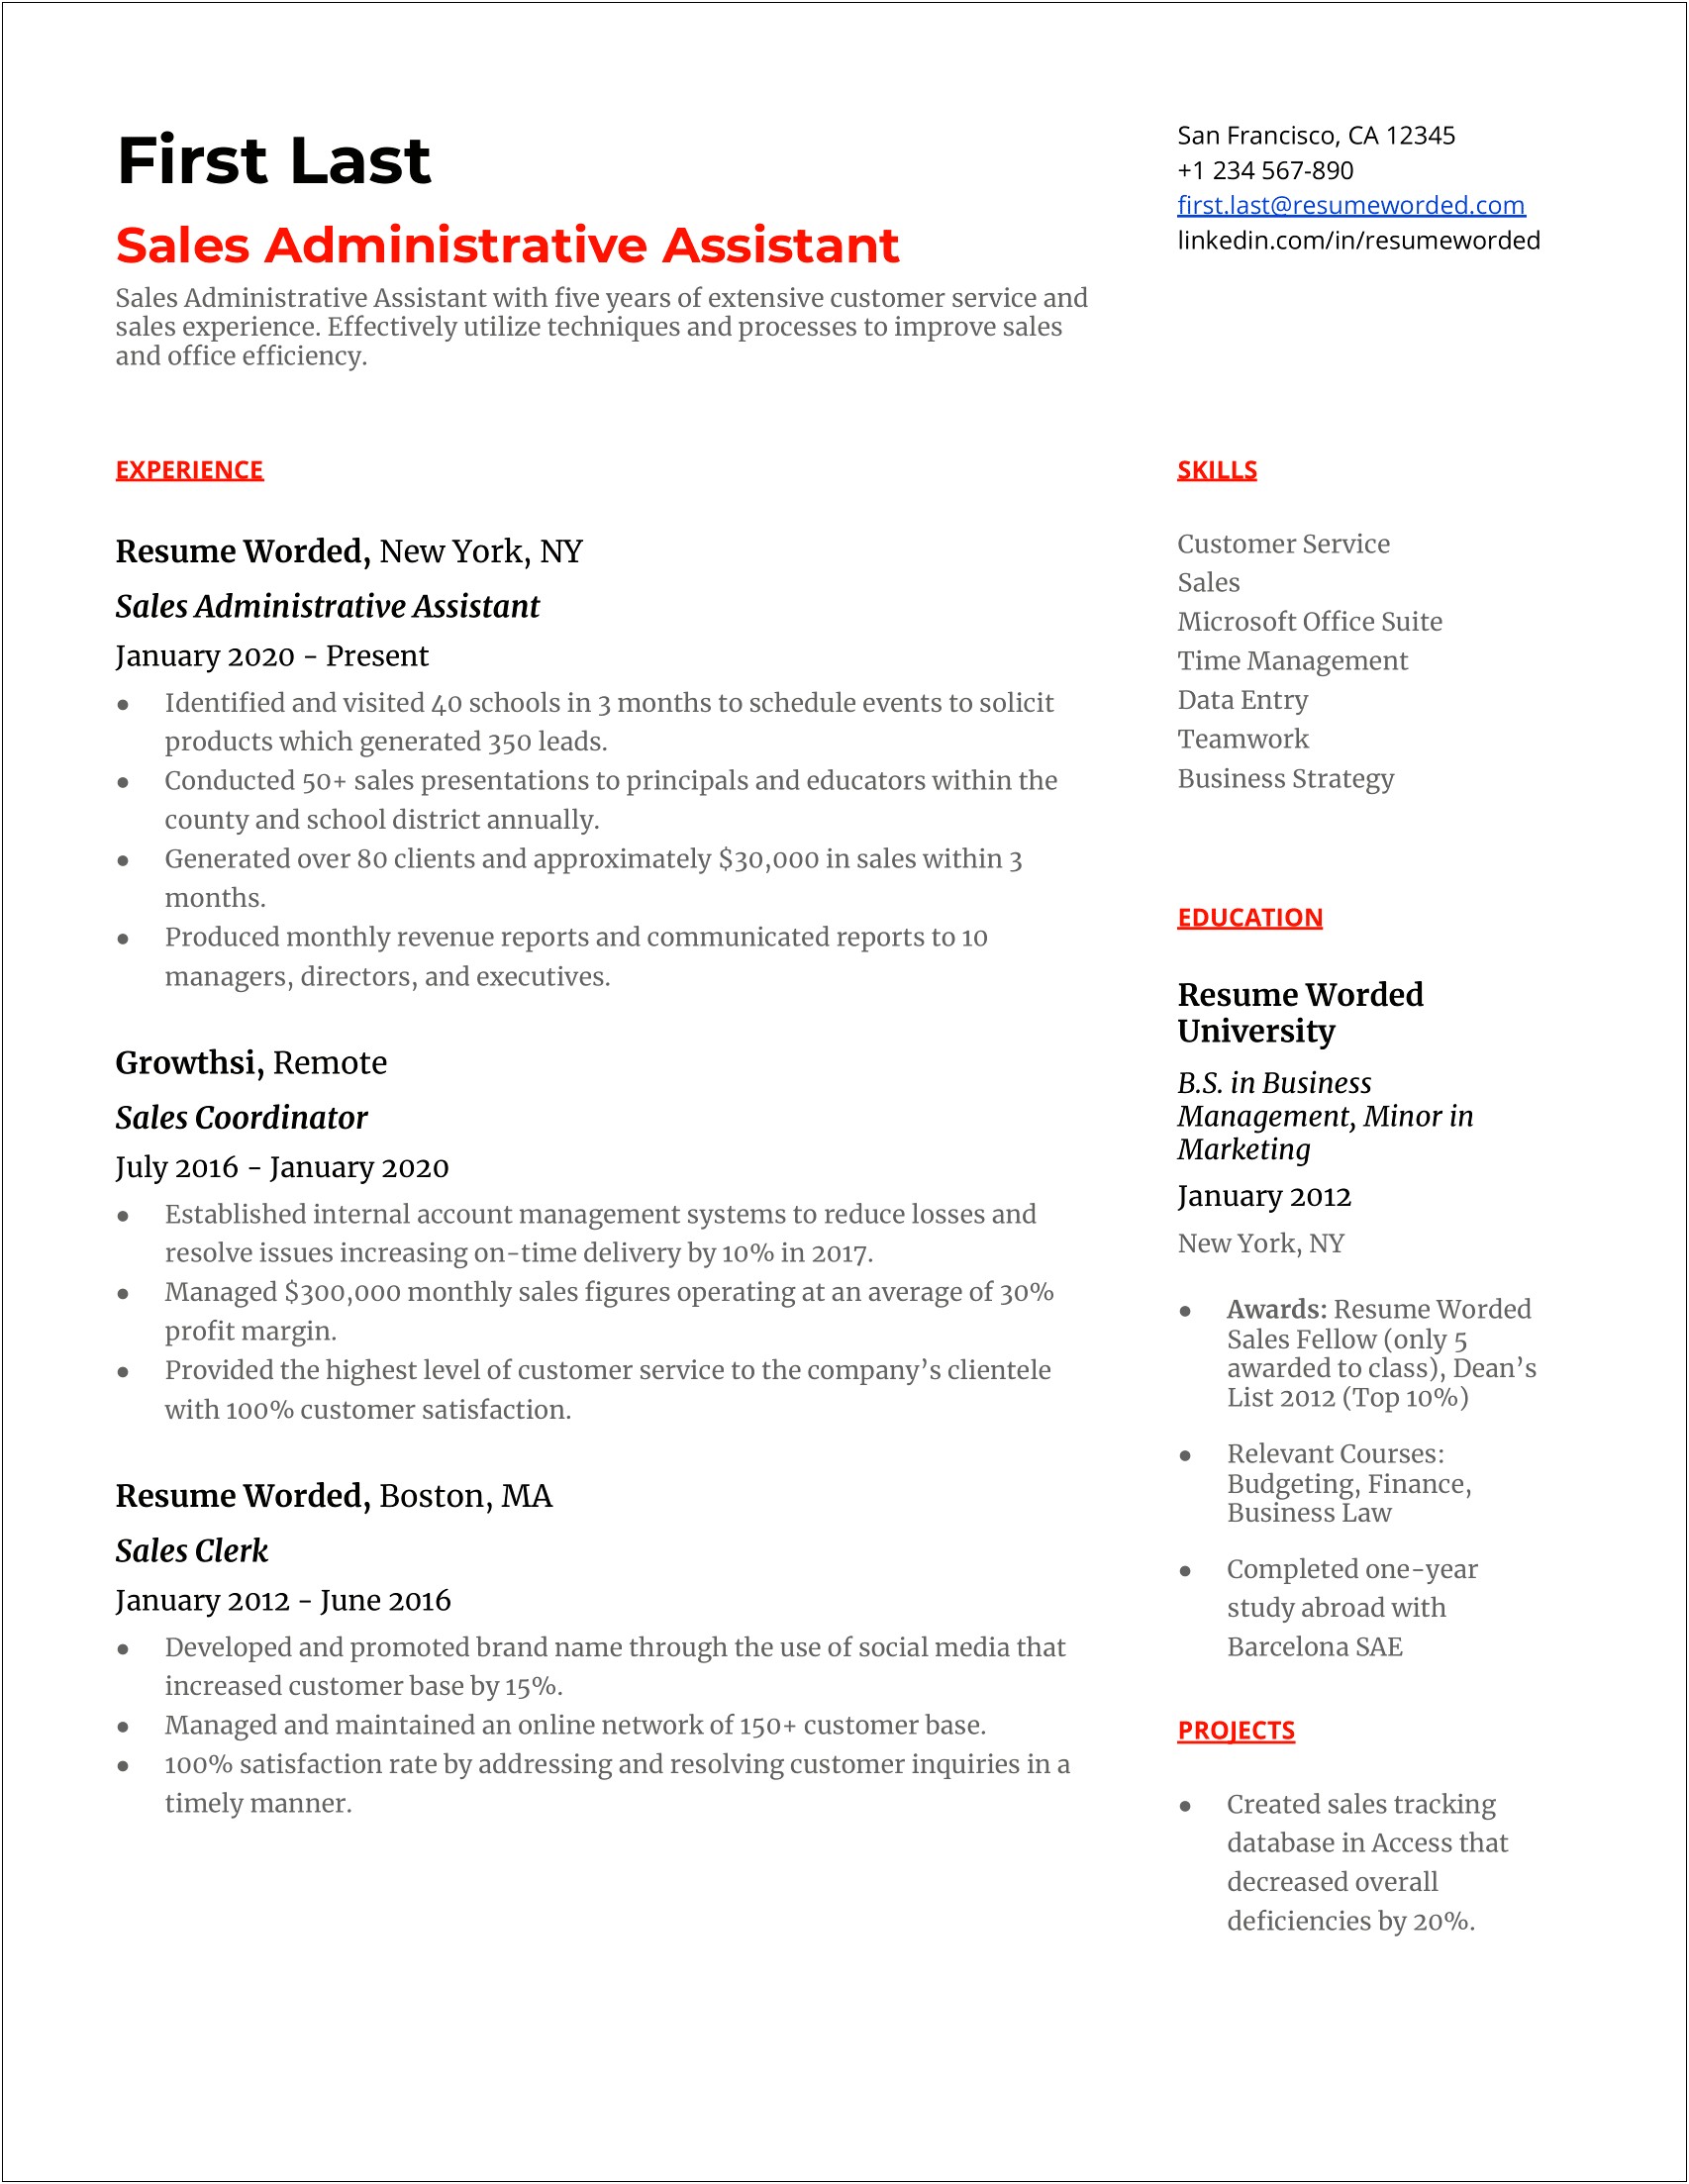 Resume Objective Summary Administrative Assistant